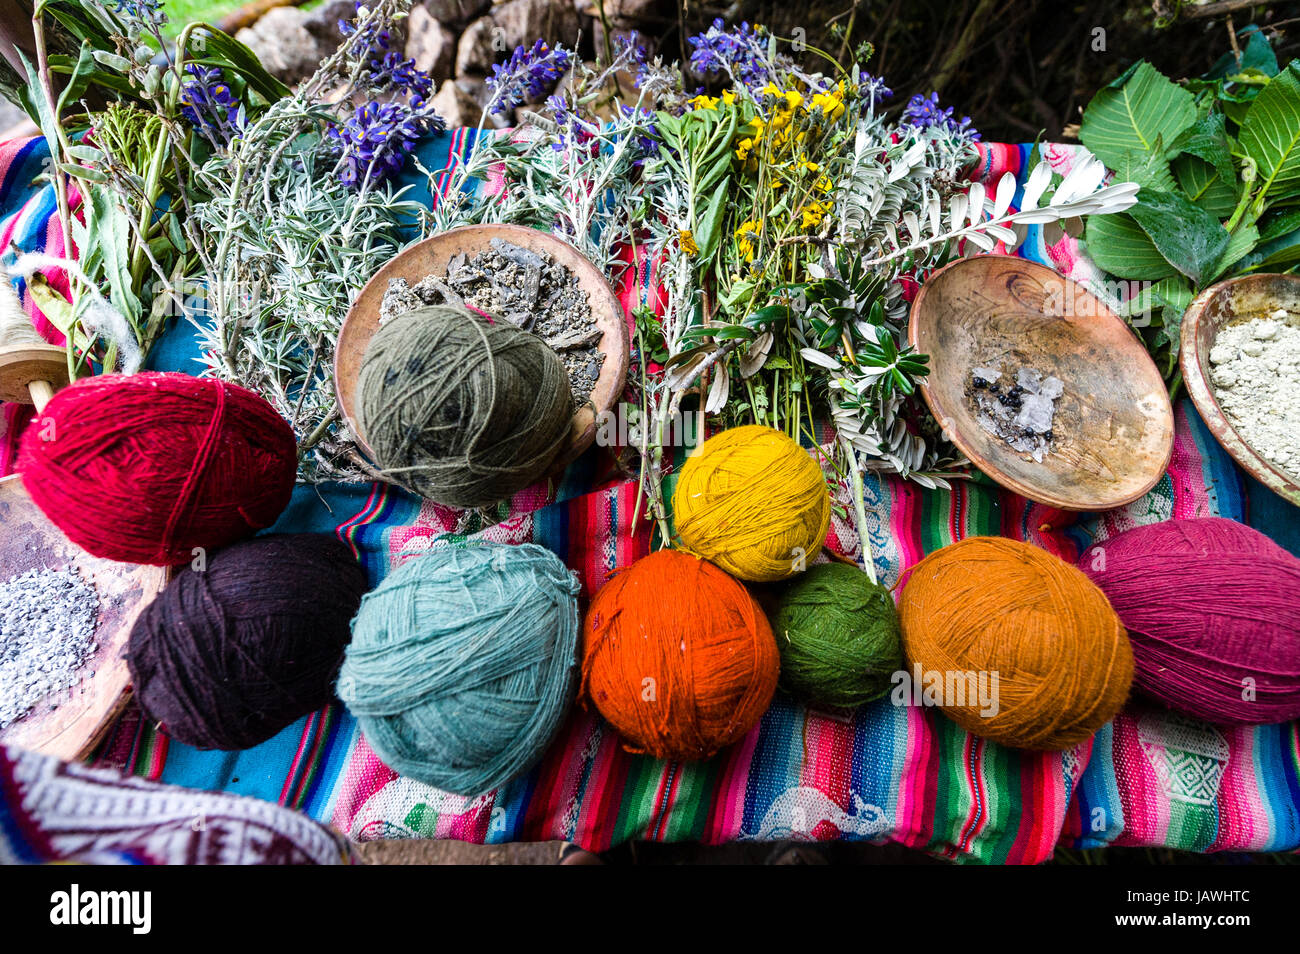 Amaru people using natural dyes to colour sheeps wool to make balls of yarn. Stock Photo